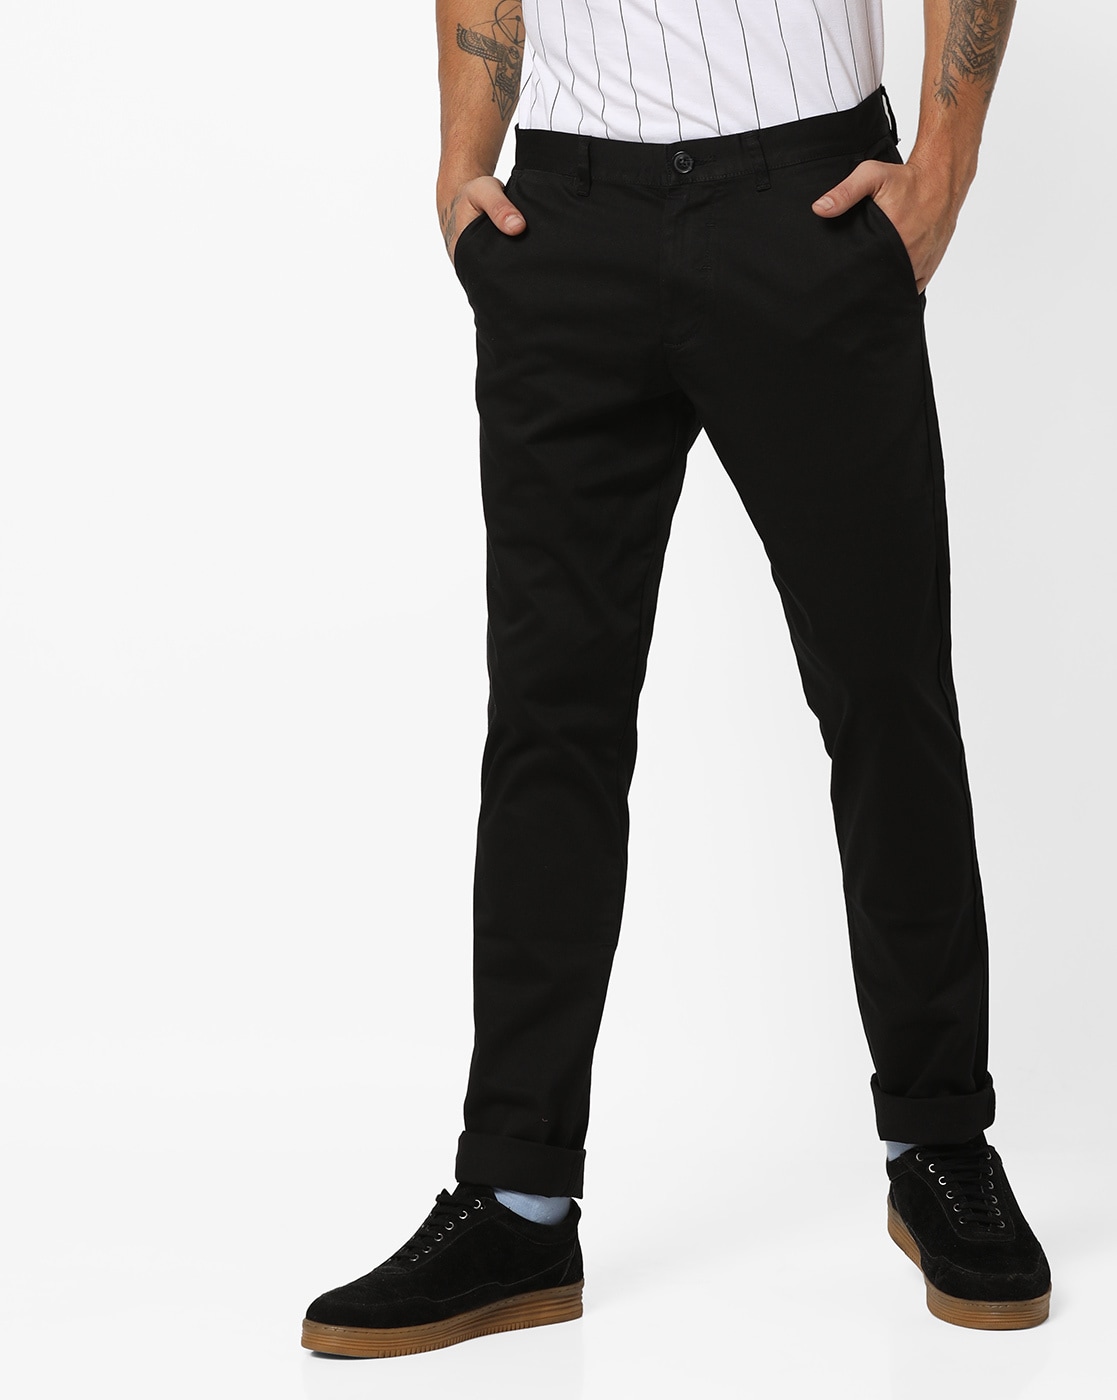 Buy Black Trousers  Pants for Boys by THE CHILDRENS PLACE Online   Ajiocom